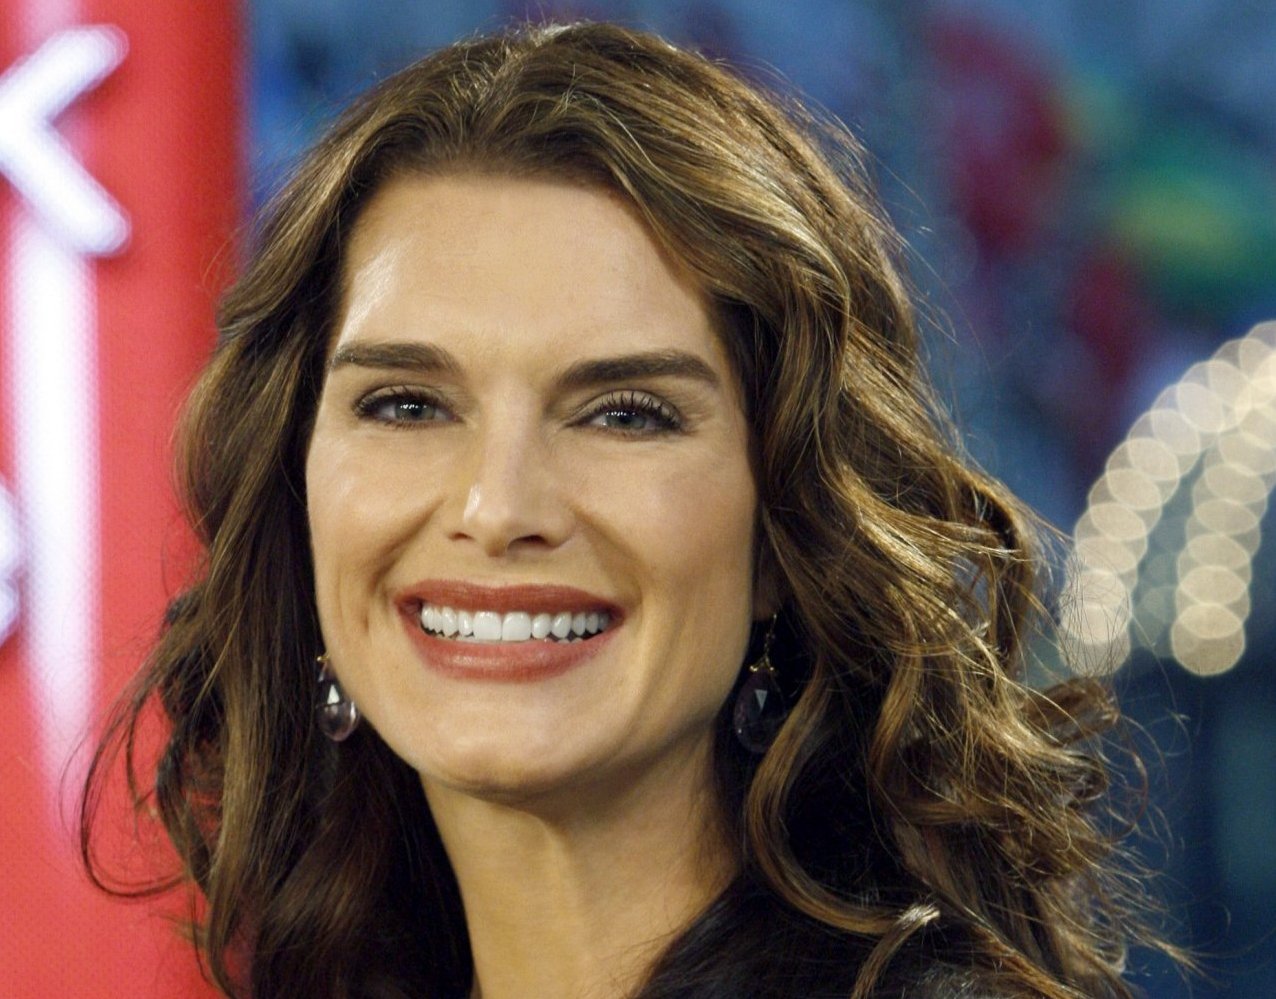 model and former child brooke shields hd image wallpaper